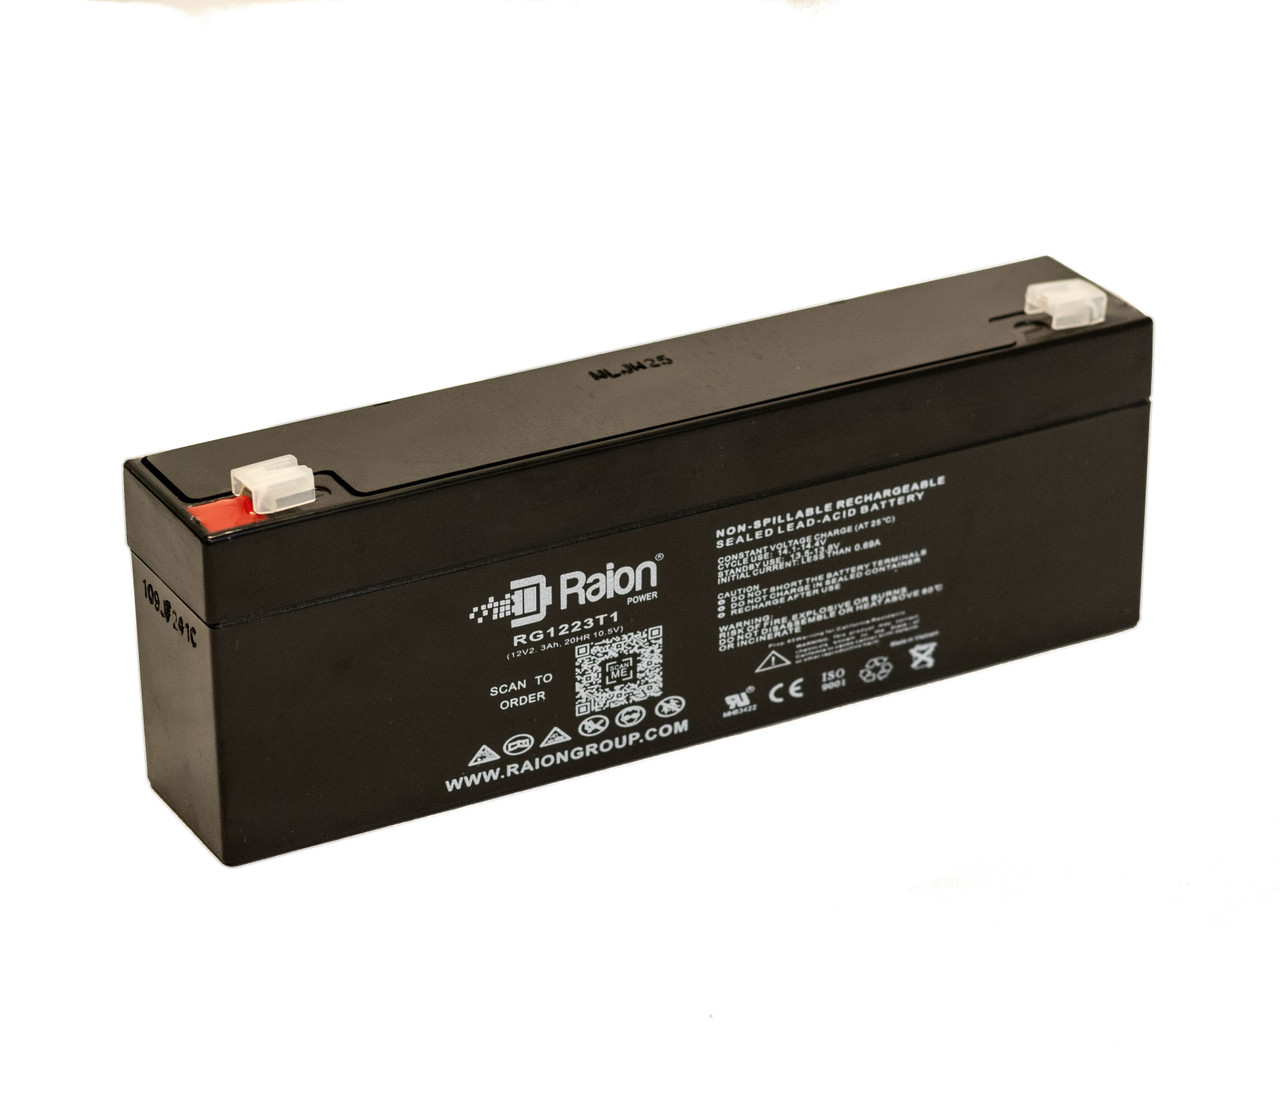 Raion Power RG1223T1 Replacement Battery for Clary Corporation PC1240